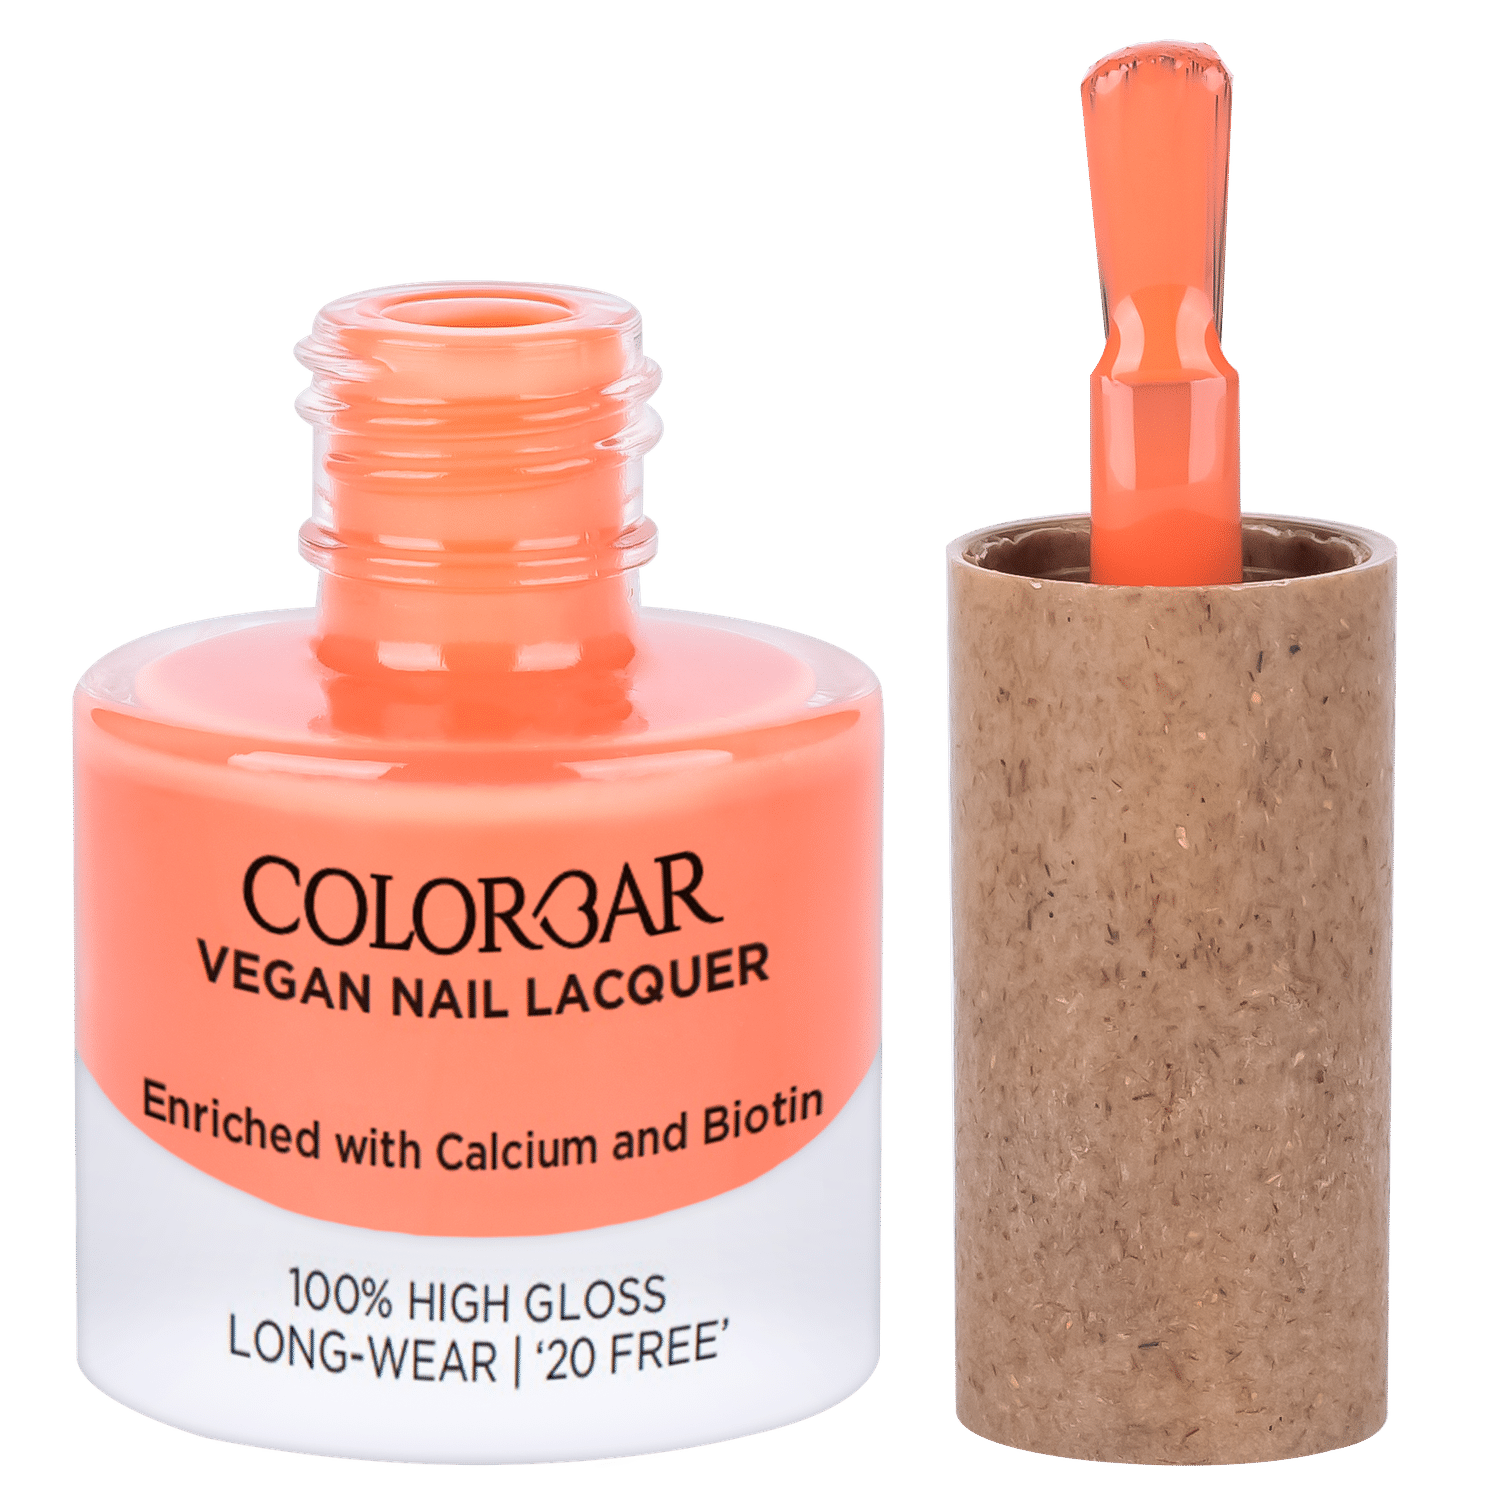 COLORBAR Nail Lacquer Glitter Frenzy - Price in India, Buy COLORBAR Nail  Lacquer Glitter Frenzy Online In India, Reviews, Ratings & Features |  Flipkart.com